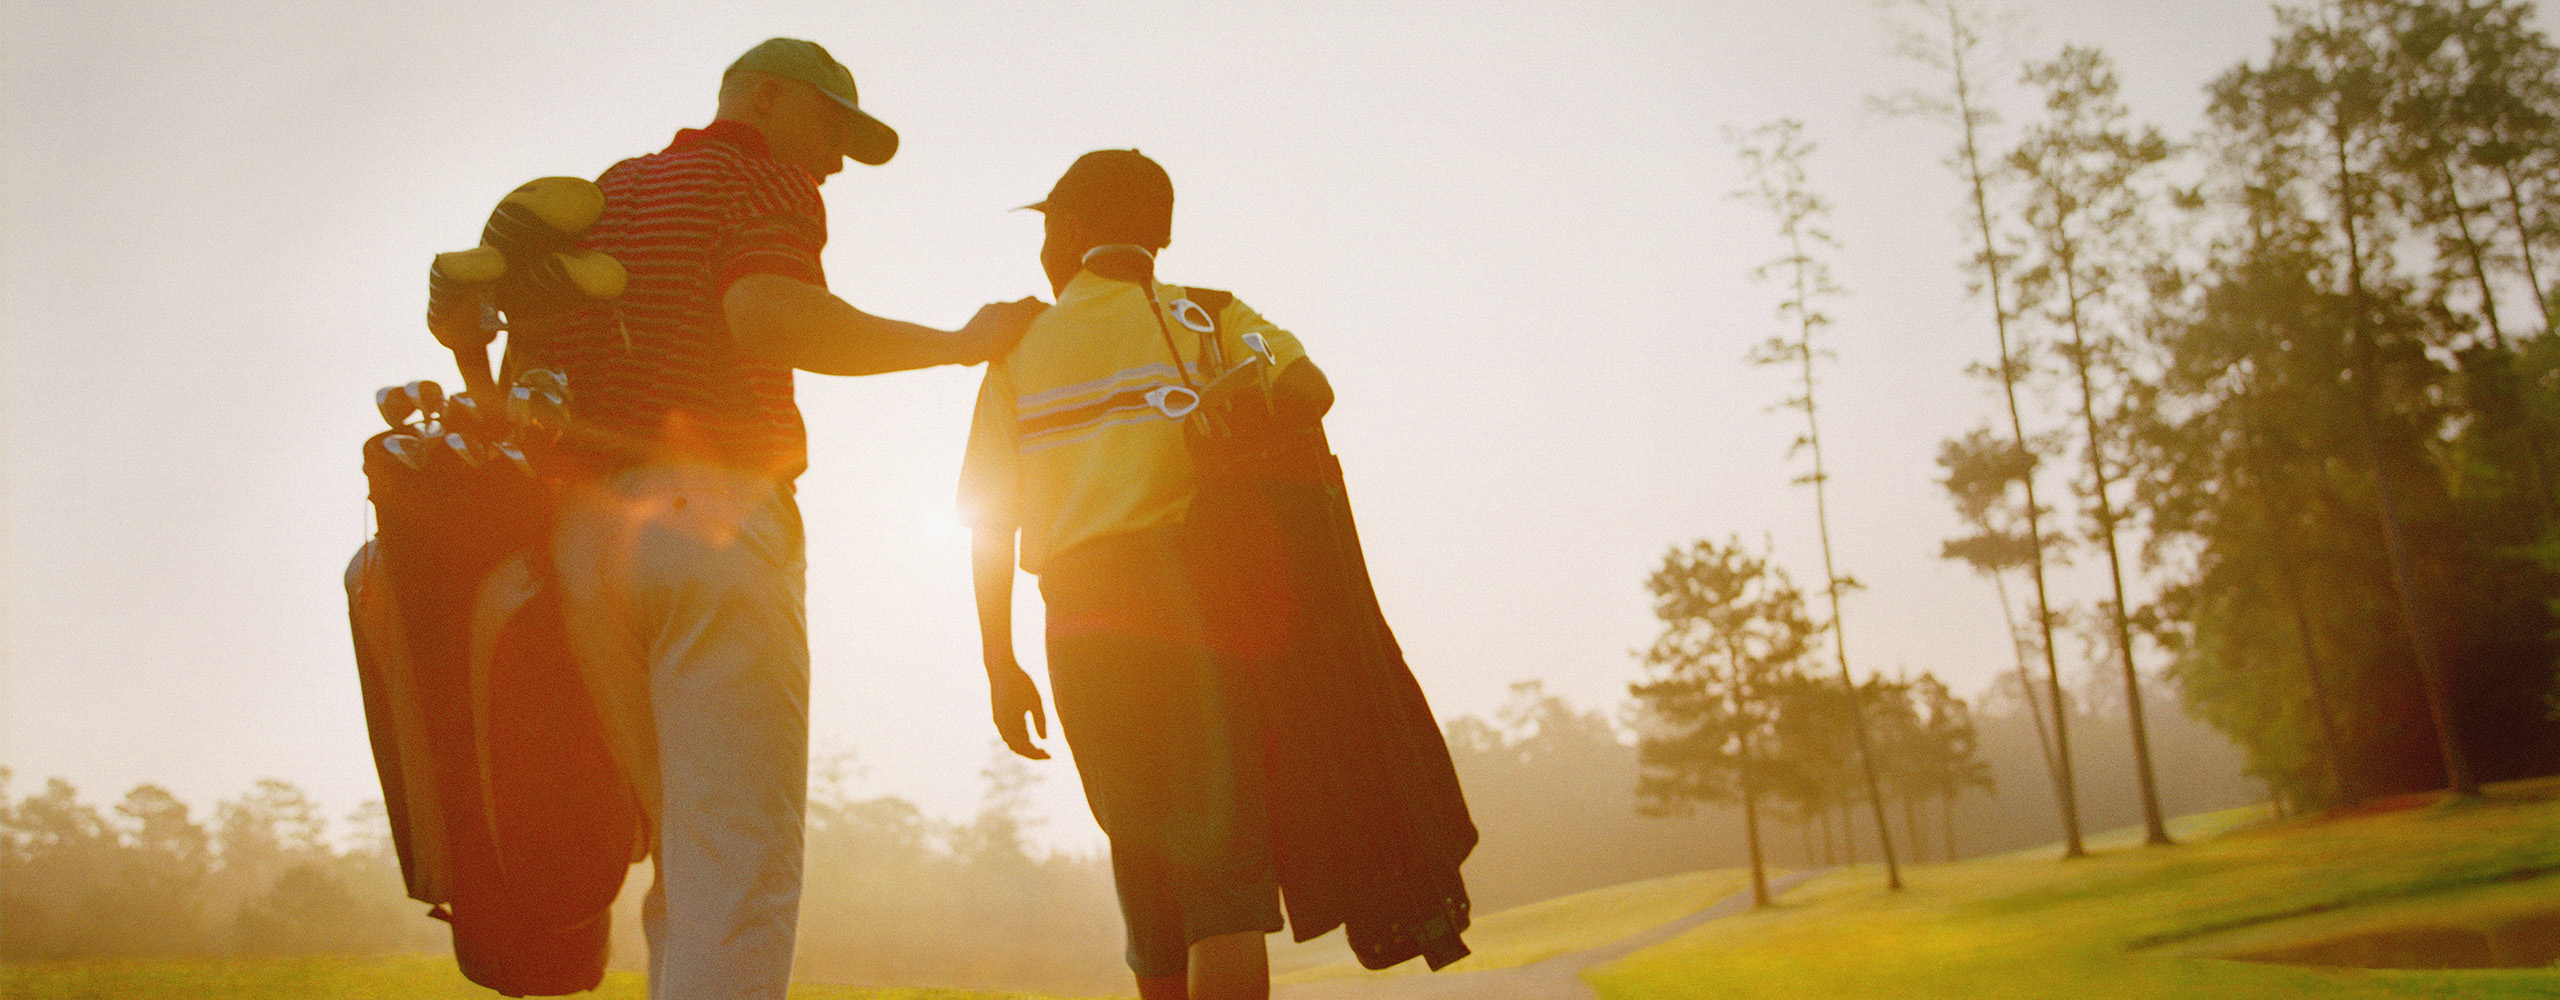 Father and Son Golf Course Image Header